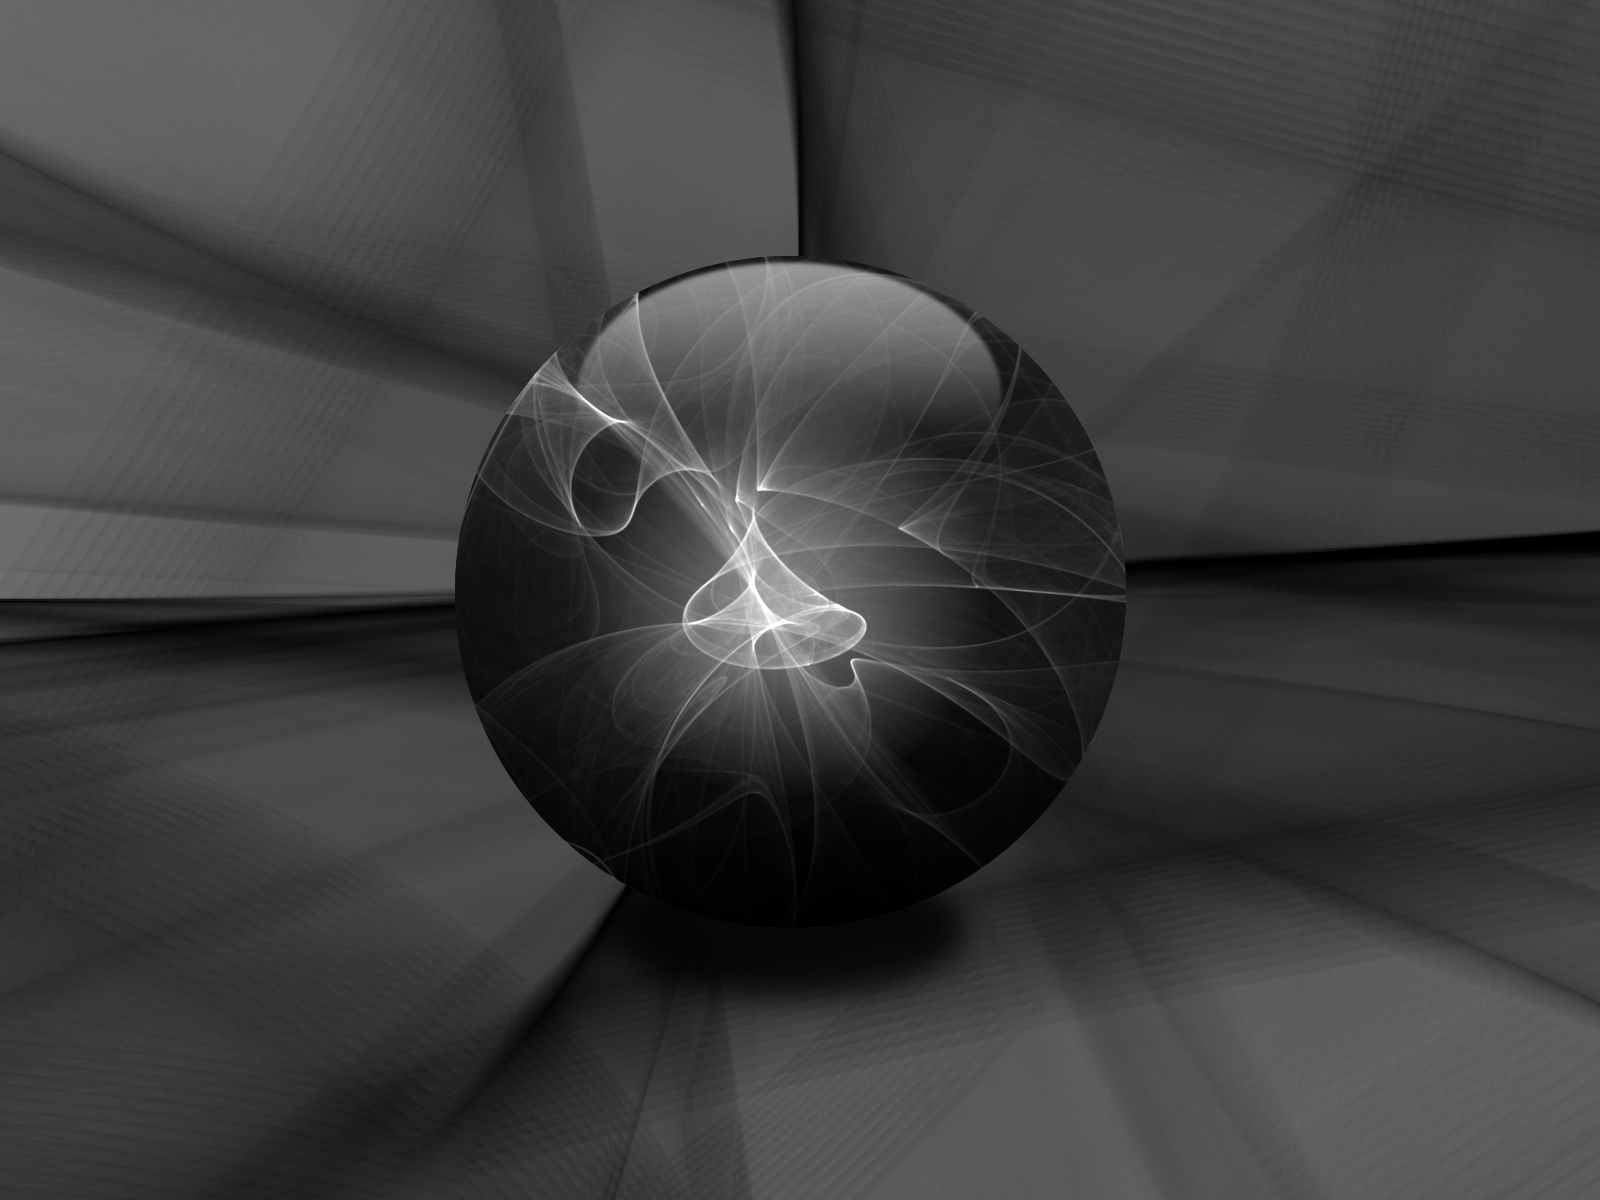 abstract, dark, ball, cgi cell phone wallpapers